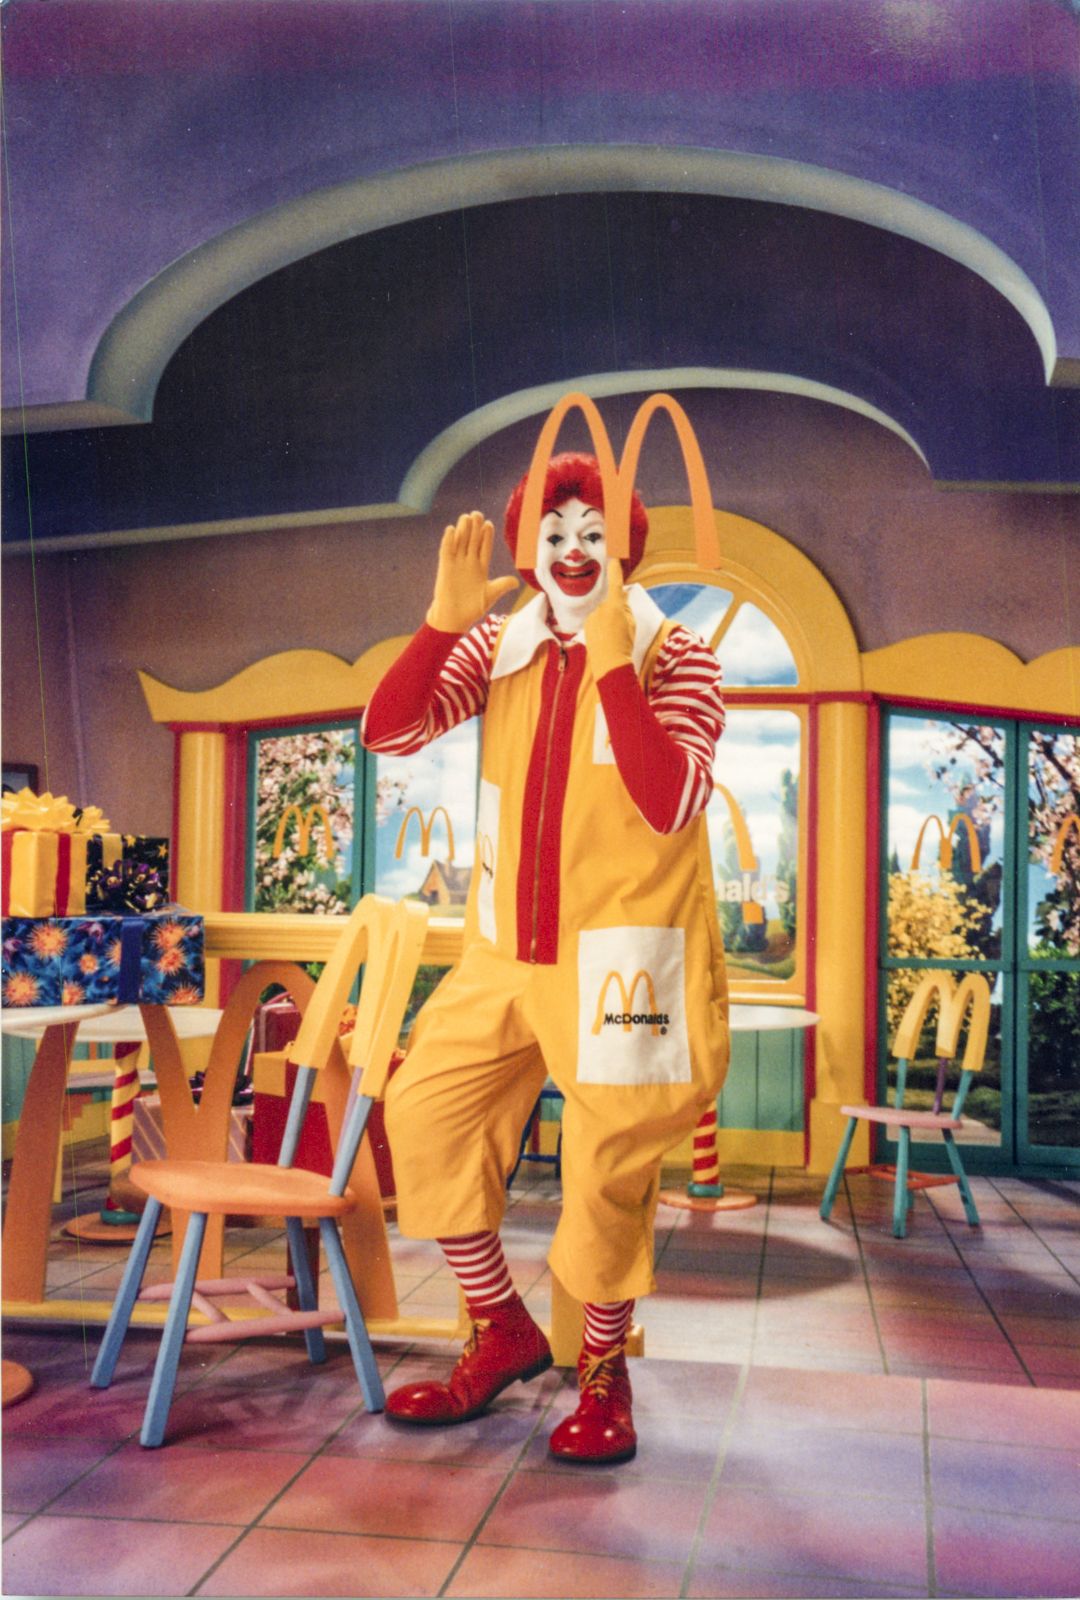 Ronald McDonald is about to decorate McDonald's to celebrate “GRIMACE'S BIRTHDAY” in McDonaldland. Party. Gift. Ronald mcdonald, Mcdonalds, Funny iphone wallpaper